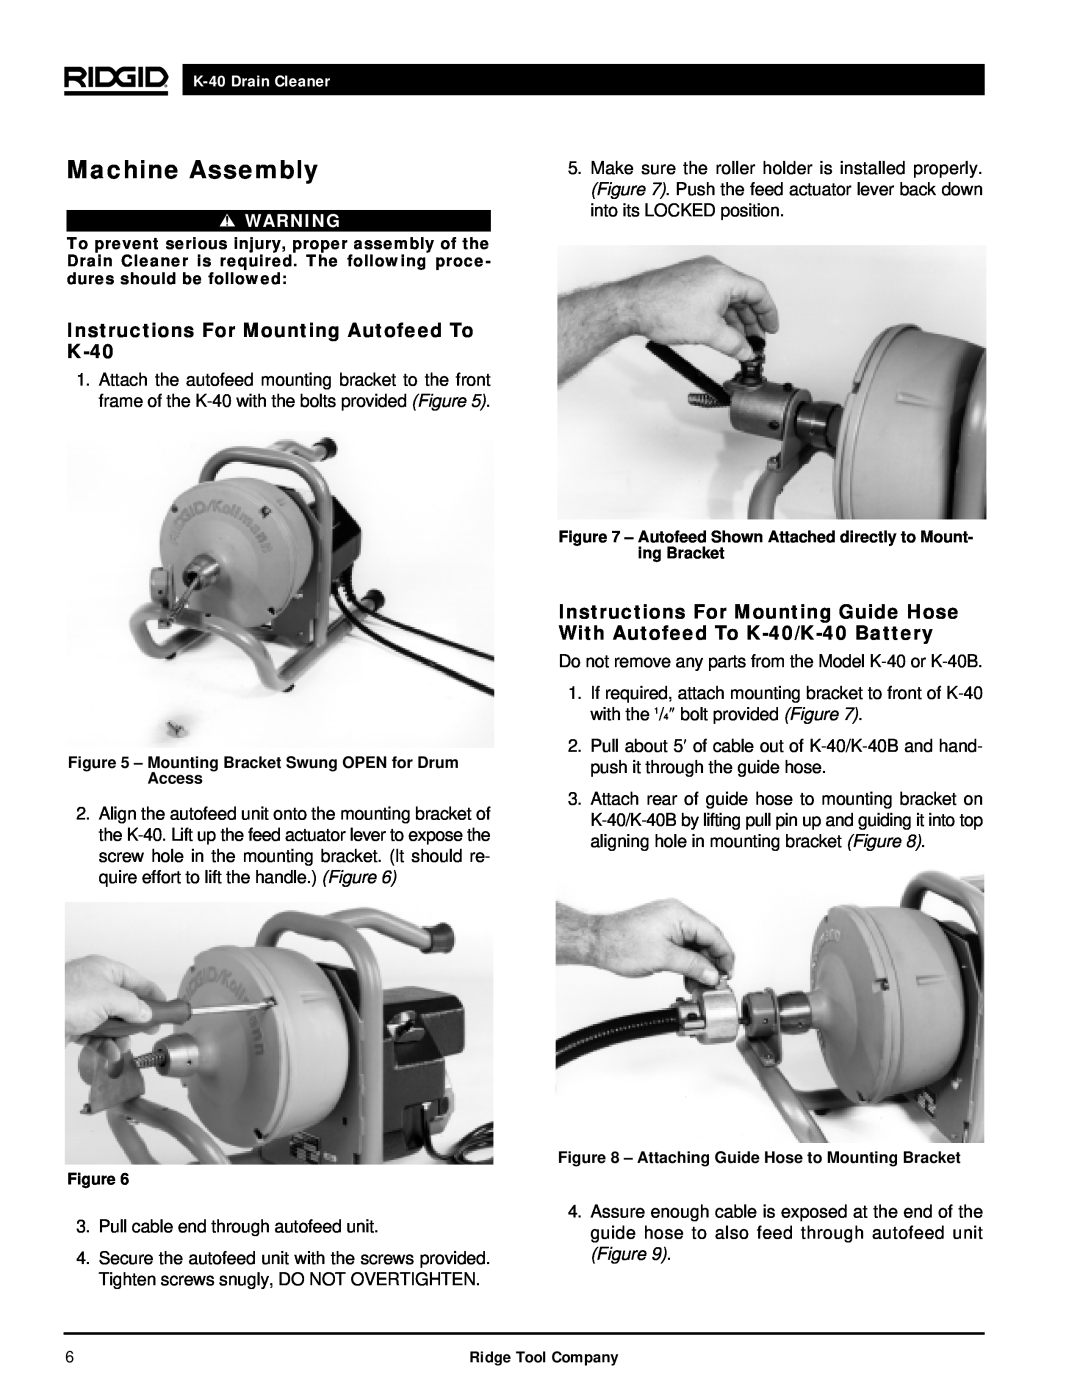 RIDGID K-40G PF, K-40B manual Machine Assembly, Instructions For Mounting Autofeed To K-40, K-40Drain Cleaner 